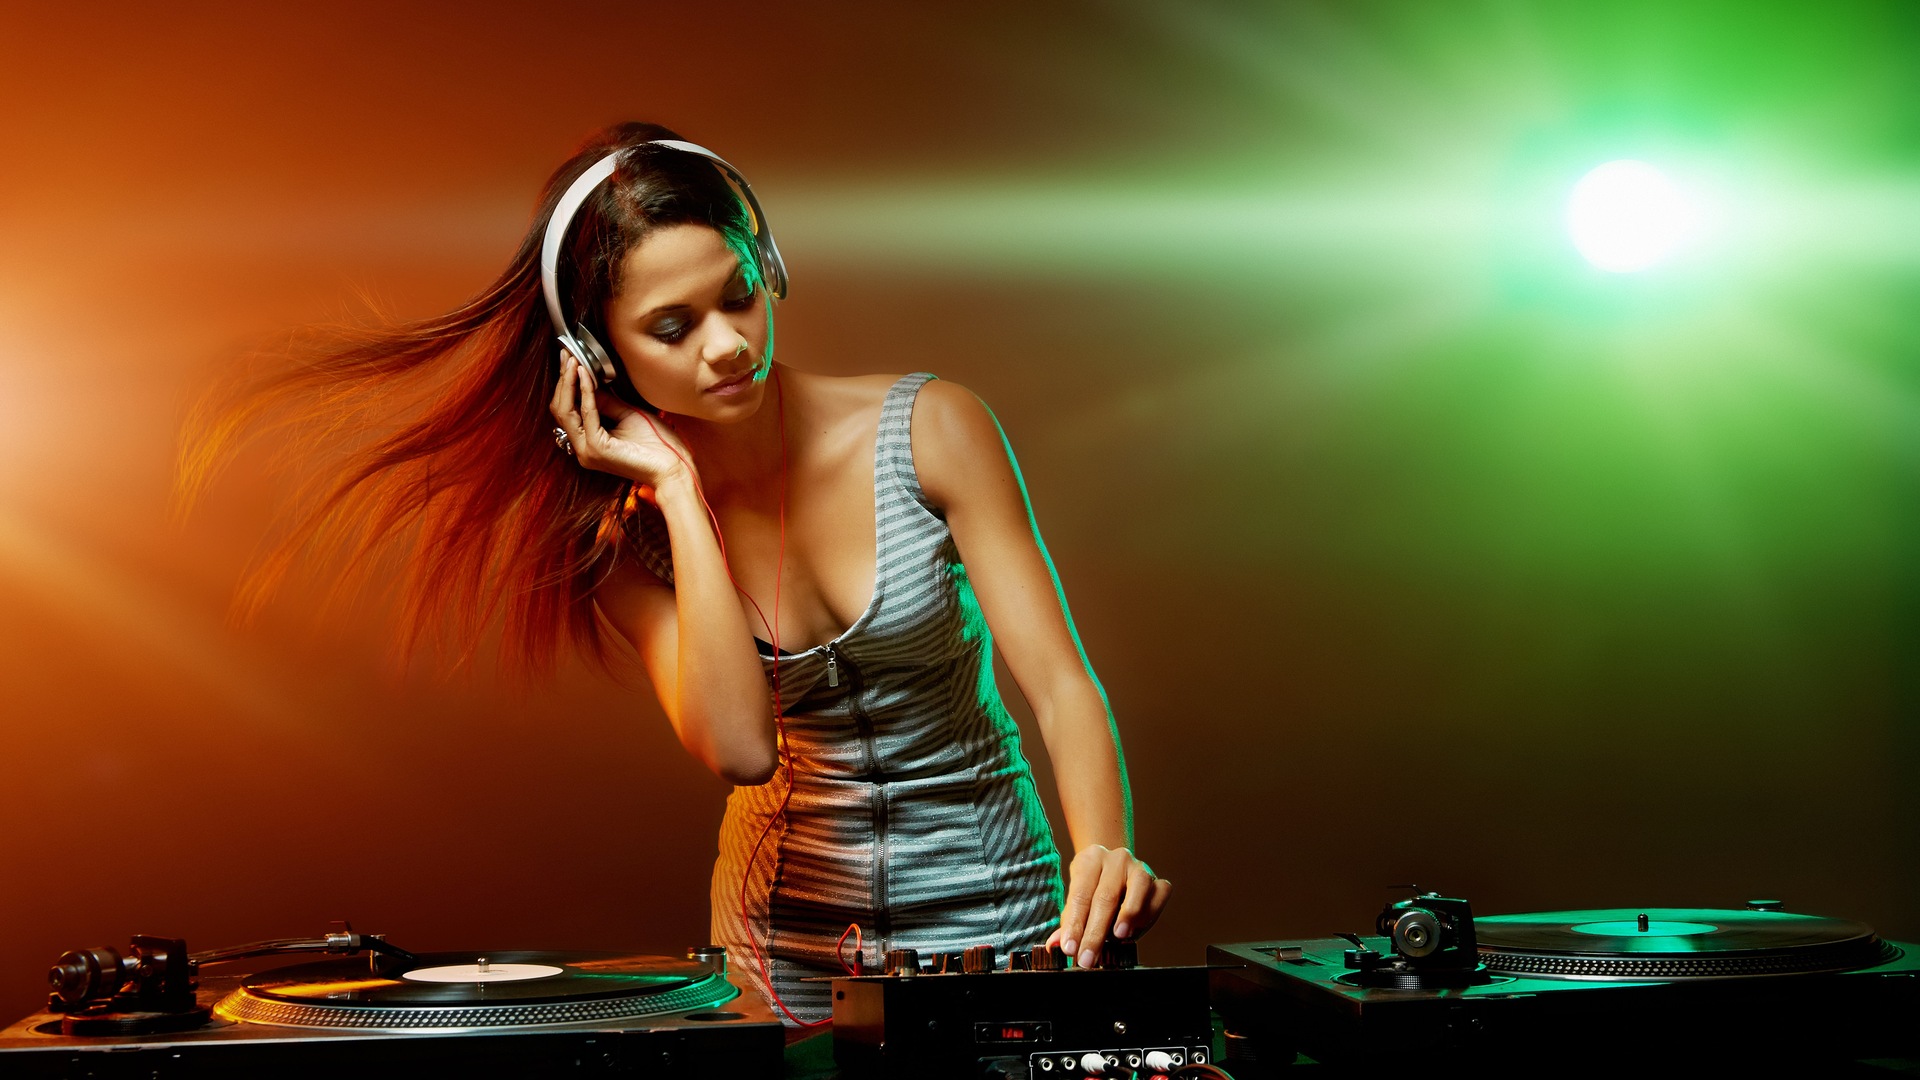 X party dj girl laptop full hd p hd k wallpapers images backgrounds photos and pictures